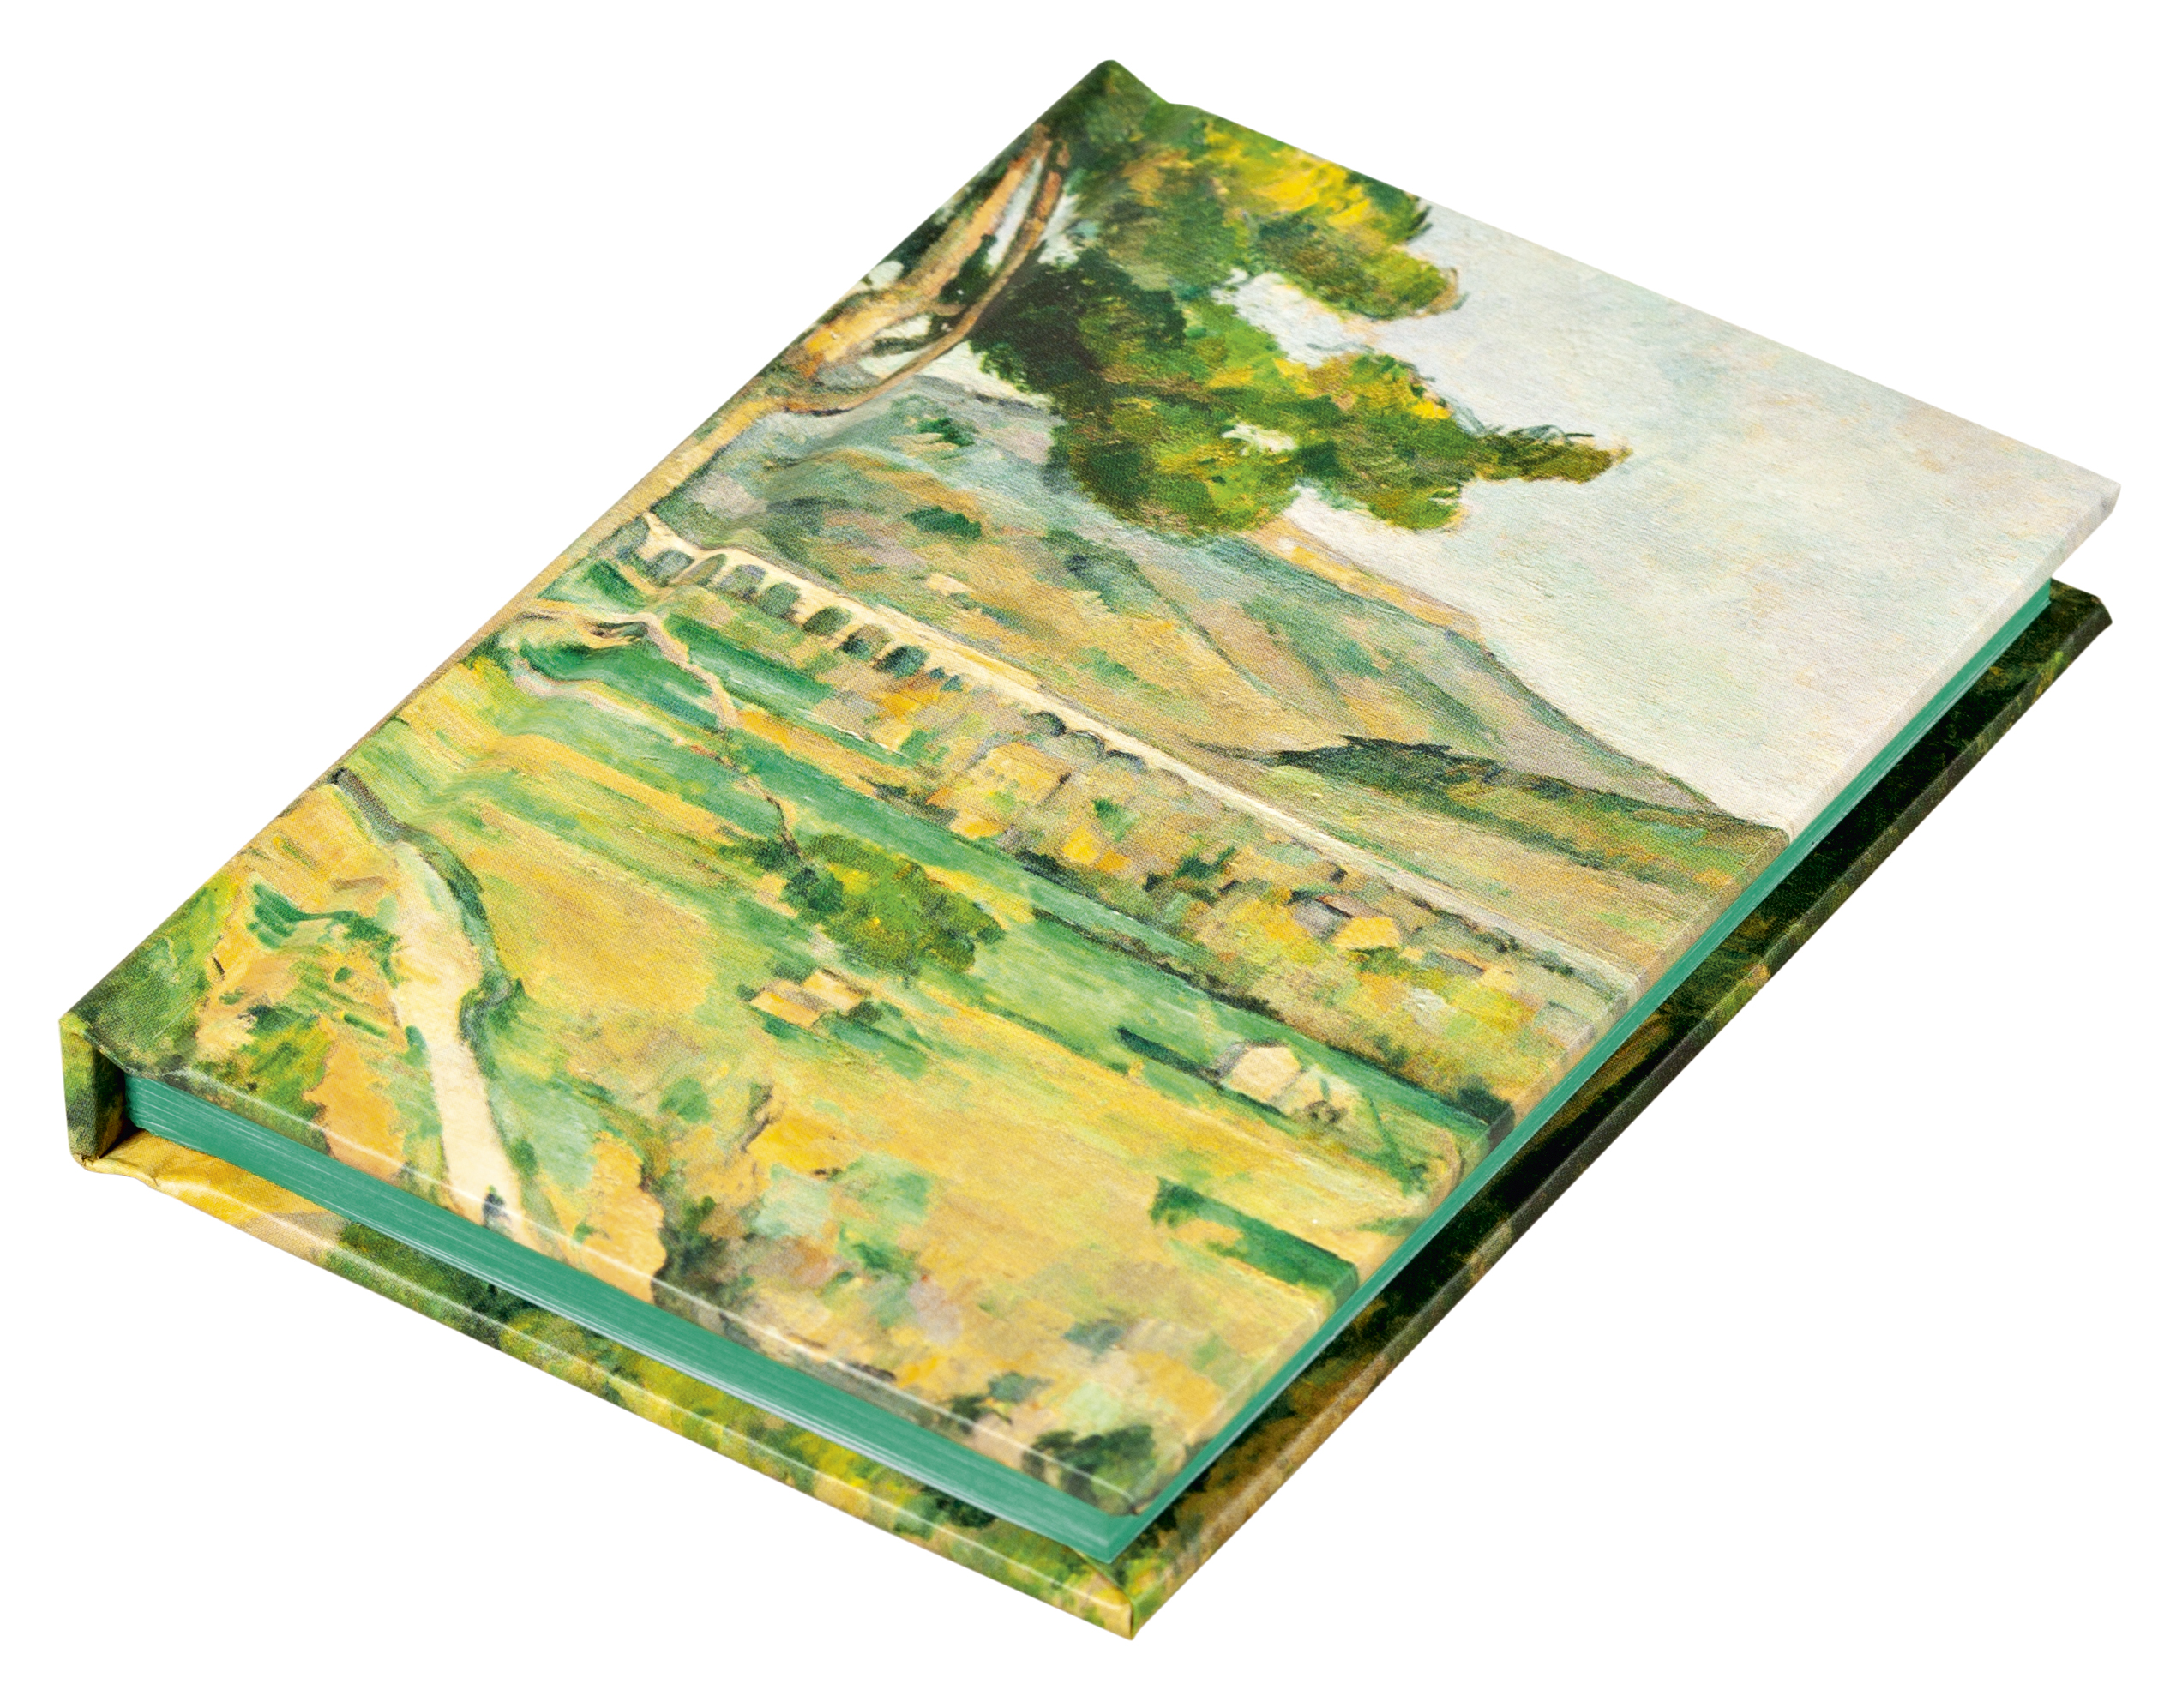 Paul Cezanne's 'Mont Sainte-Victoire' painting, to notebook cover, by teNeues' Stationery.